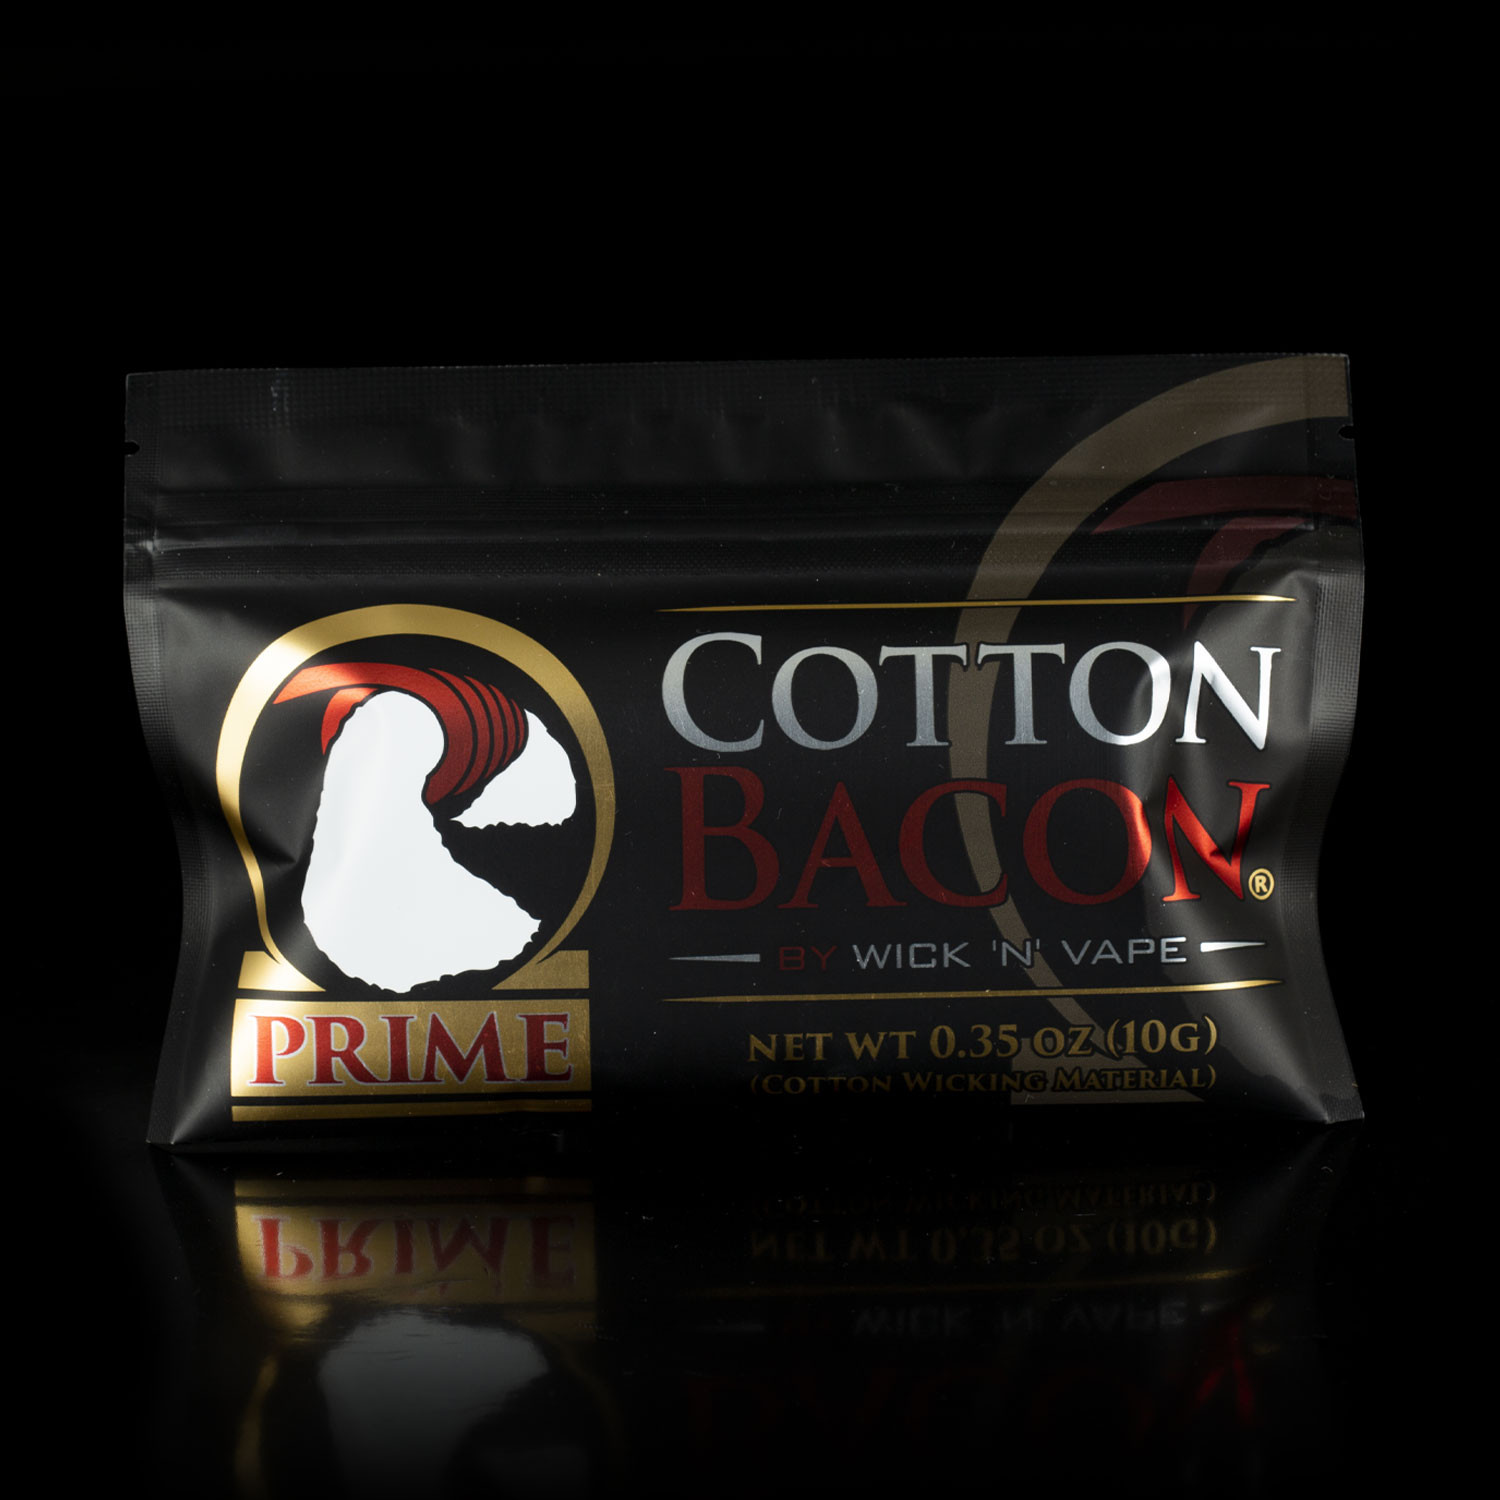 Cotton Bacon Prime By Wick N Vape - Huff & Puffers